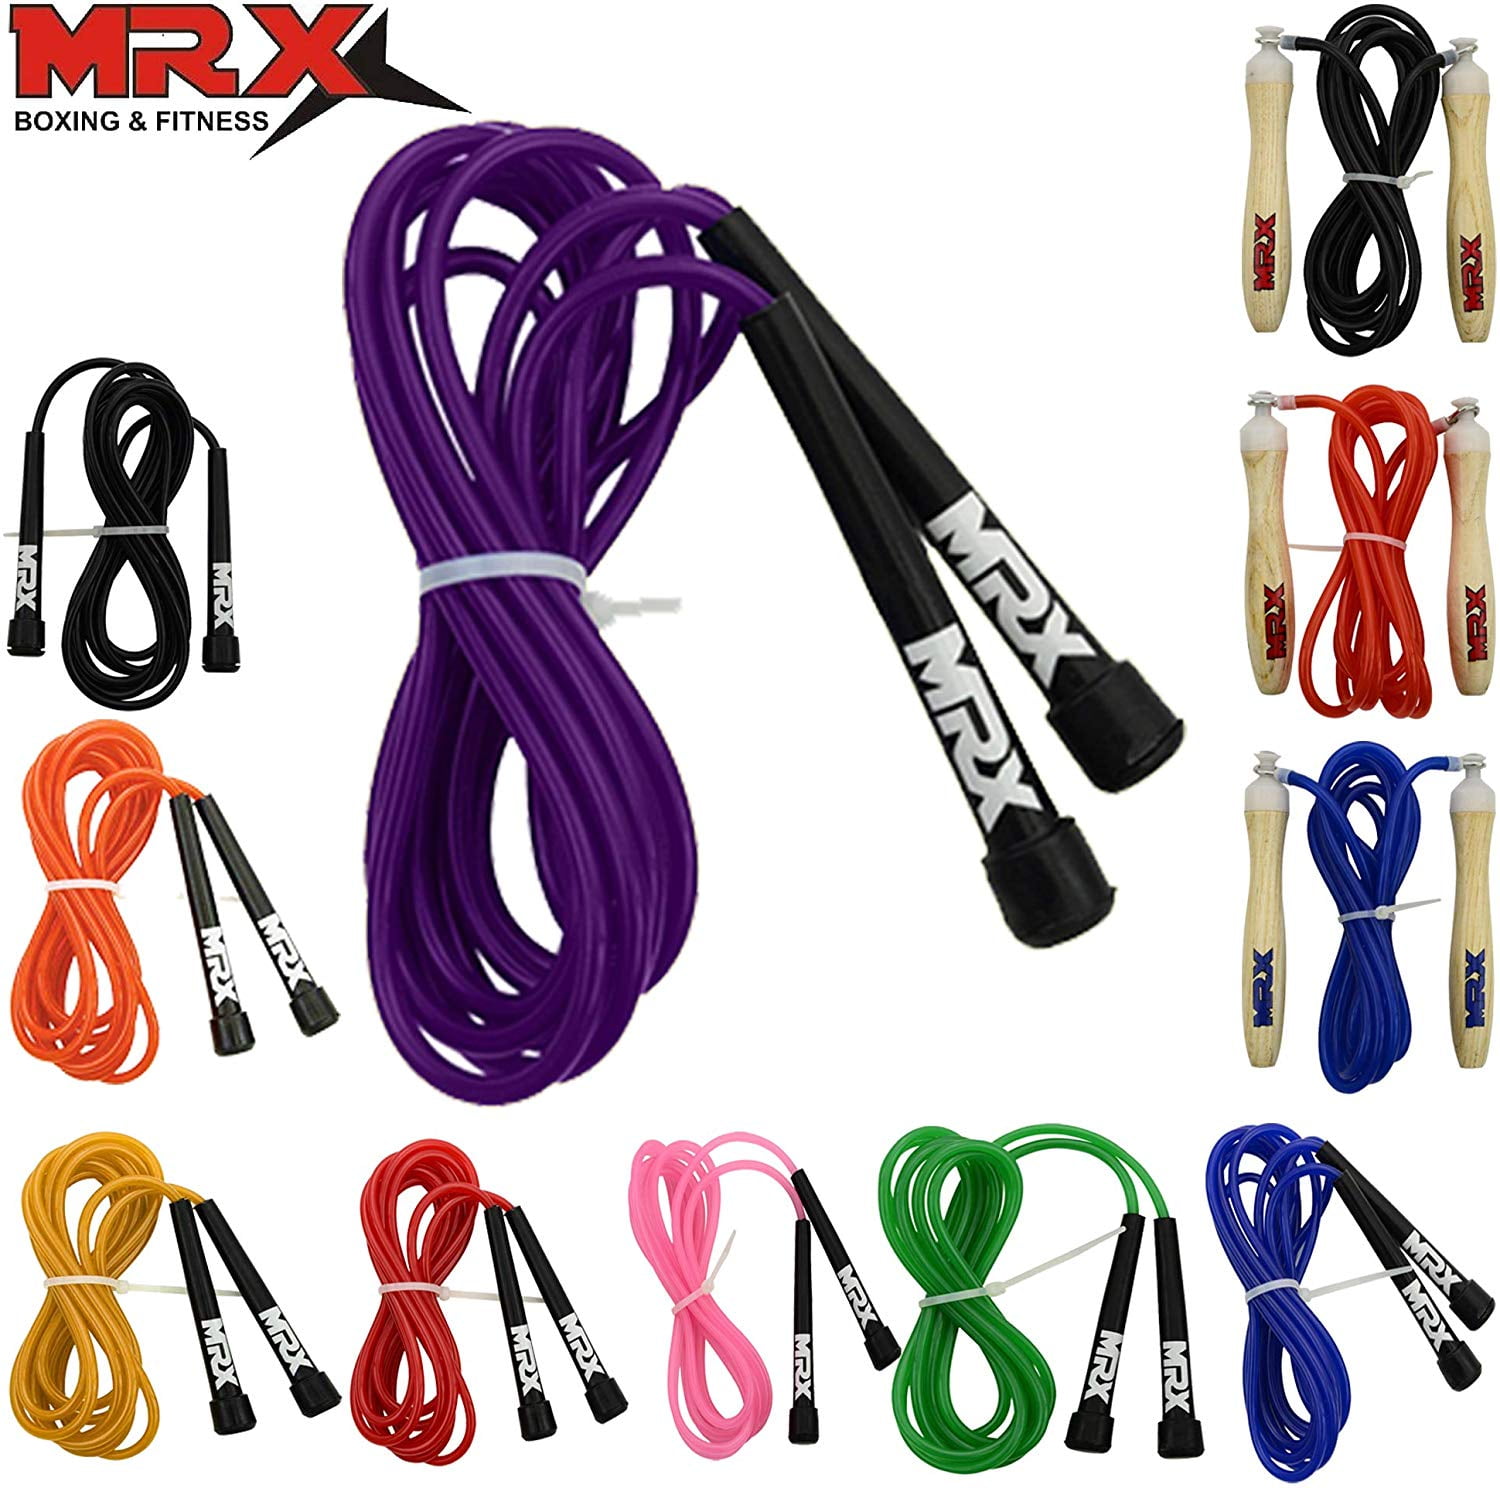 Plastic Skipping Rope Jumping Speed Exercise Fitness Aerobic Workout Gym Purple 